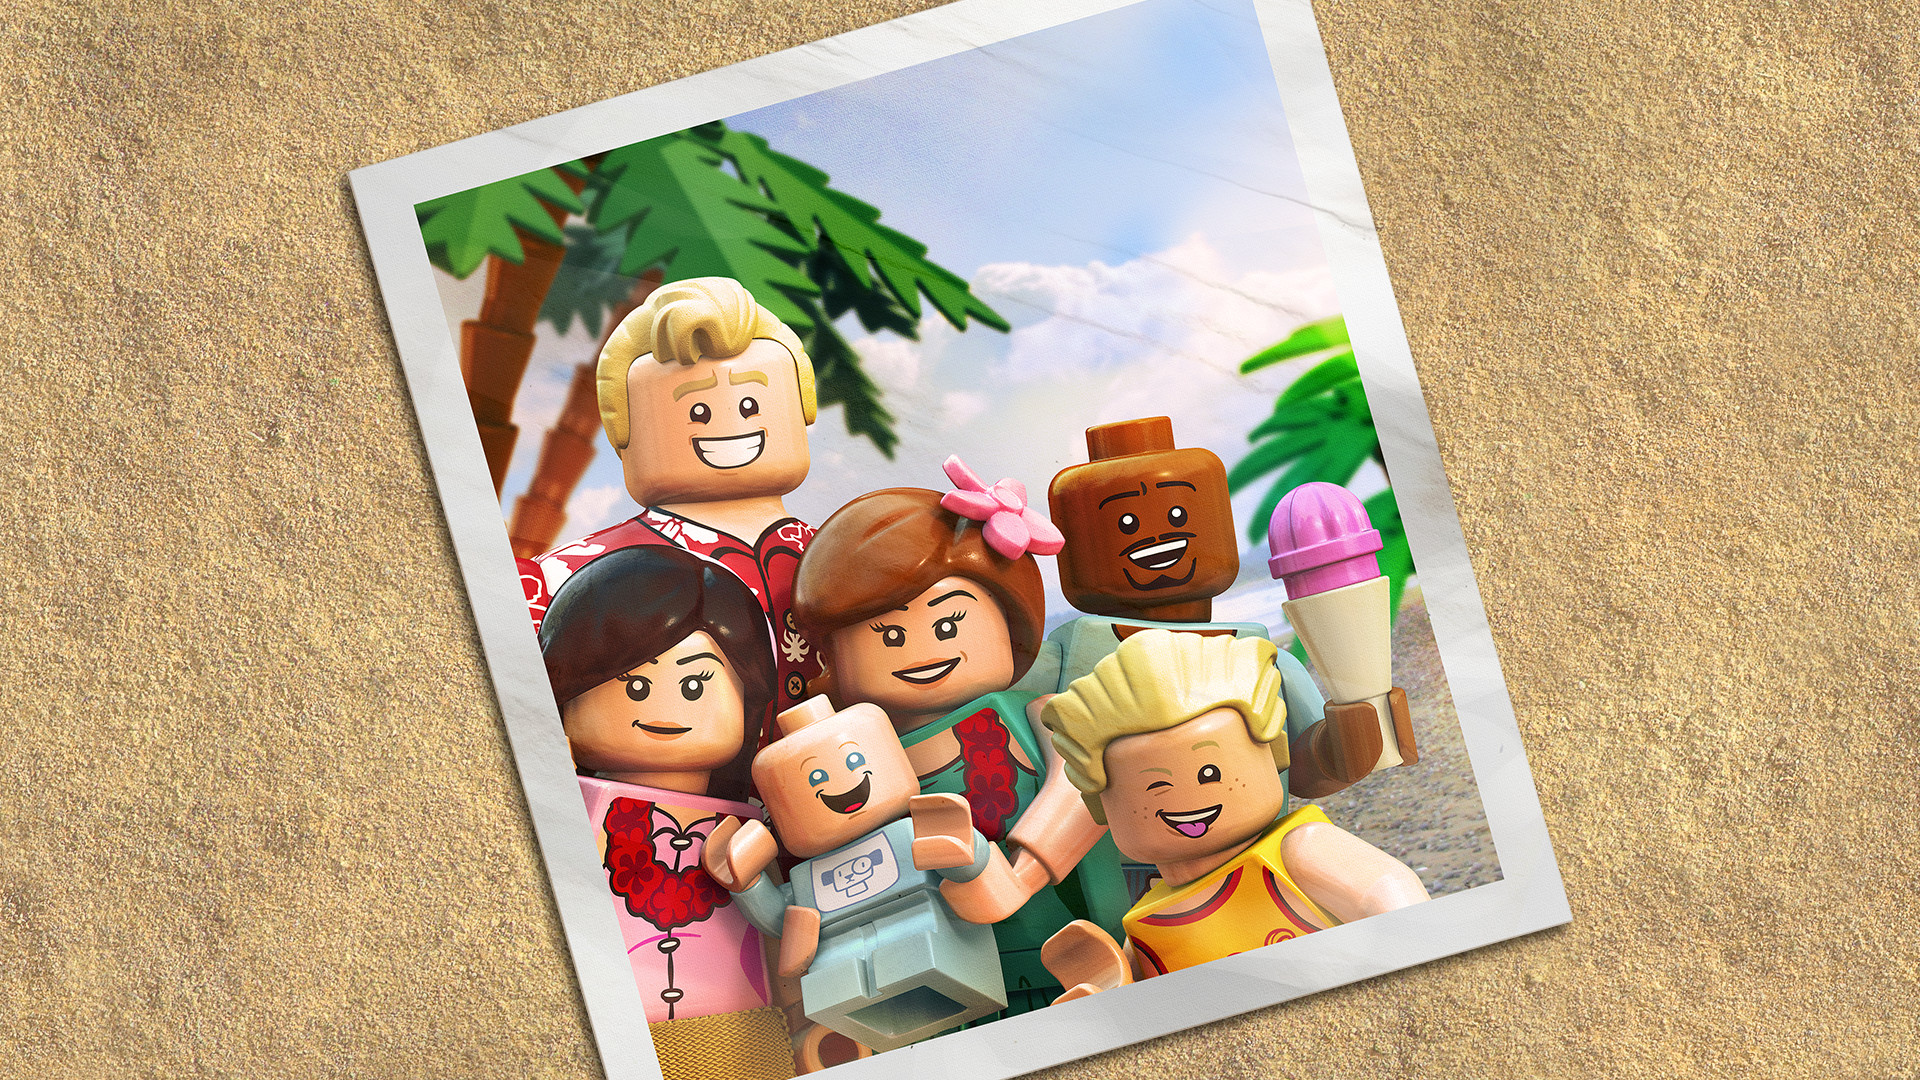 LEGO THE INCREDIBLES - Parr Family Vacation Character Pack DLC EU PS5 CD Key 0.73 usd